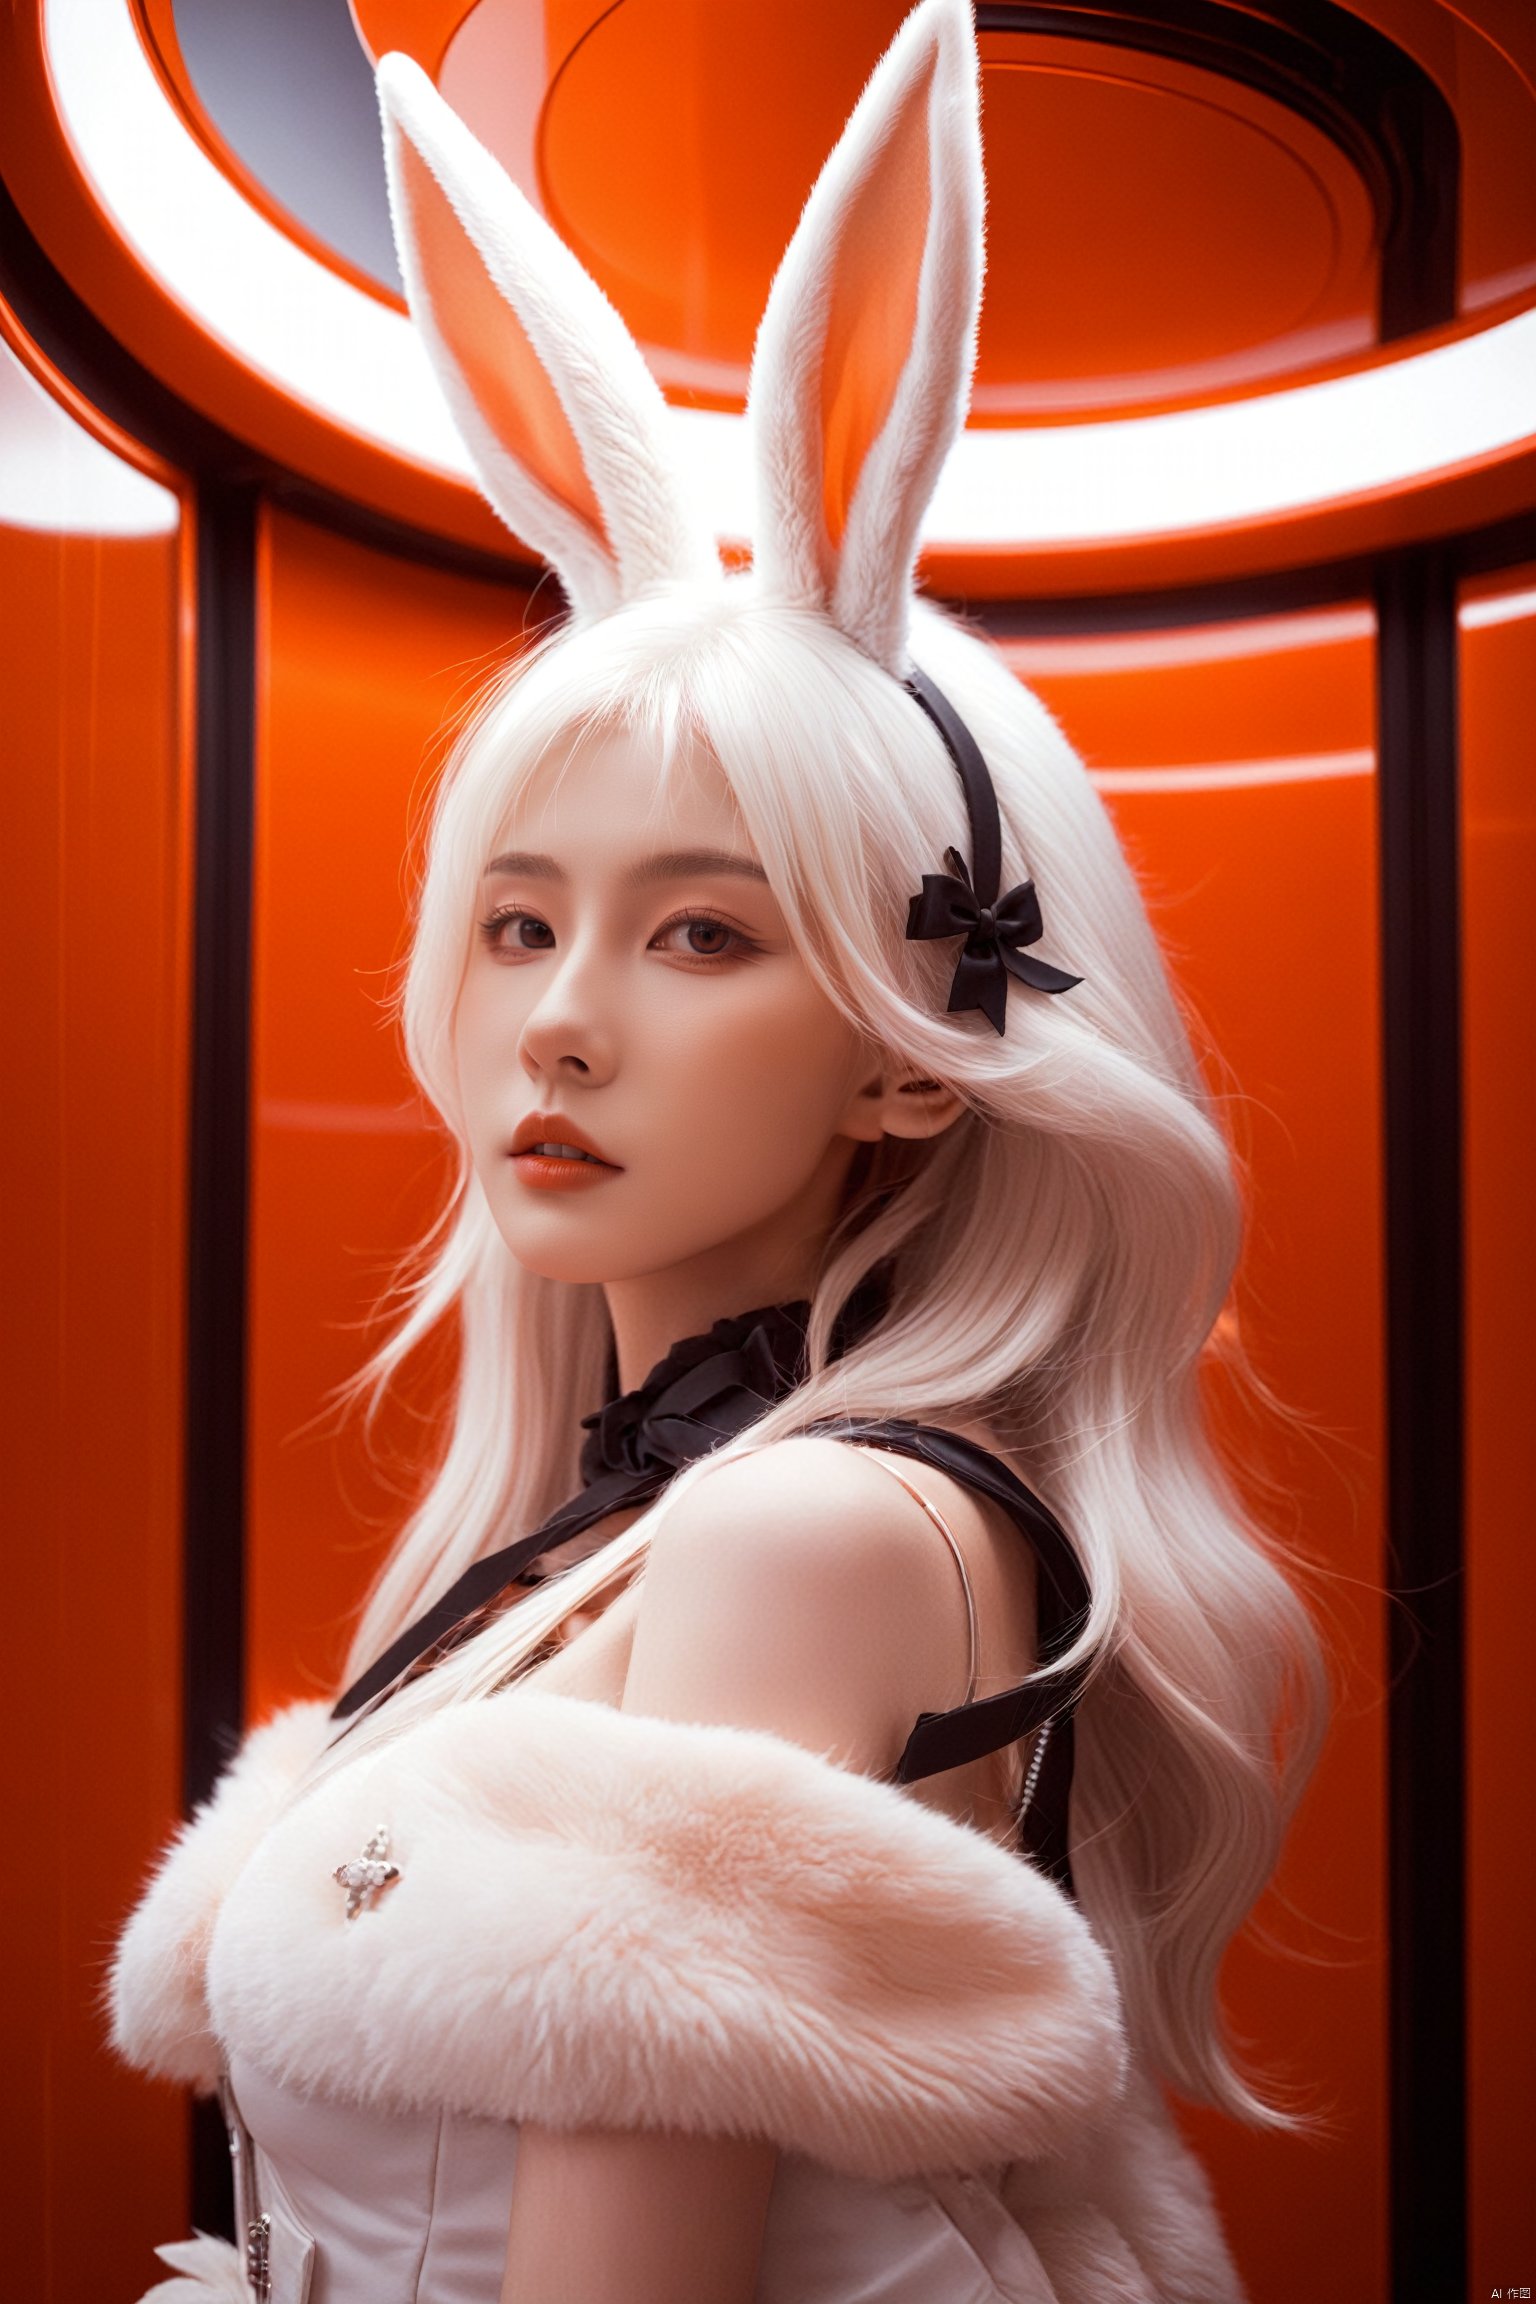 a beautiful female model standing in a space elevator,white hair,rabbit ears,Orange lighting,in the style of realistic hyper-detailed rendering,pseudo-realistic,redscale film,mark henson,nikita veprikov,